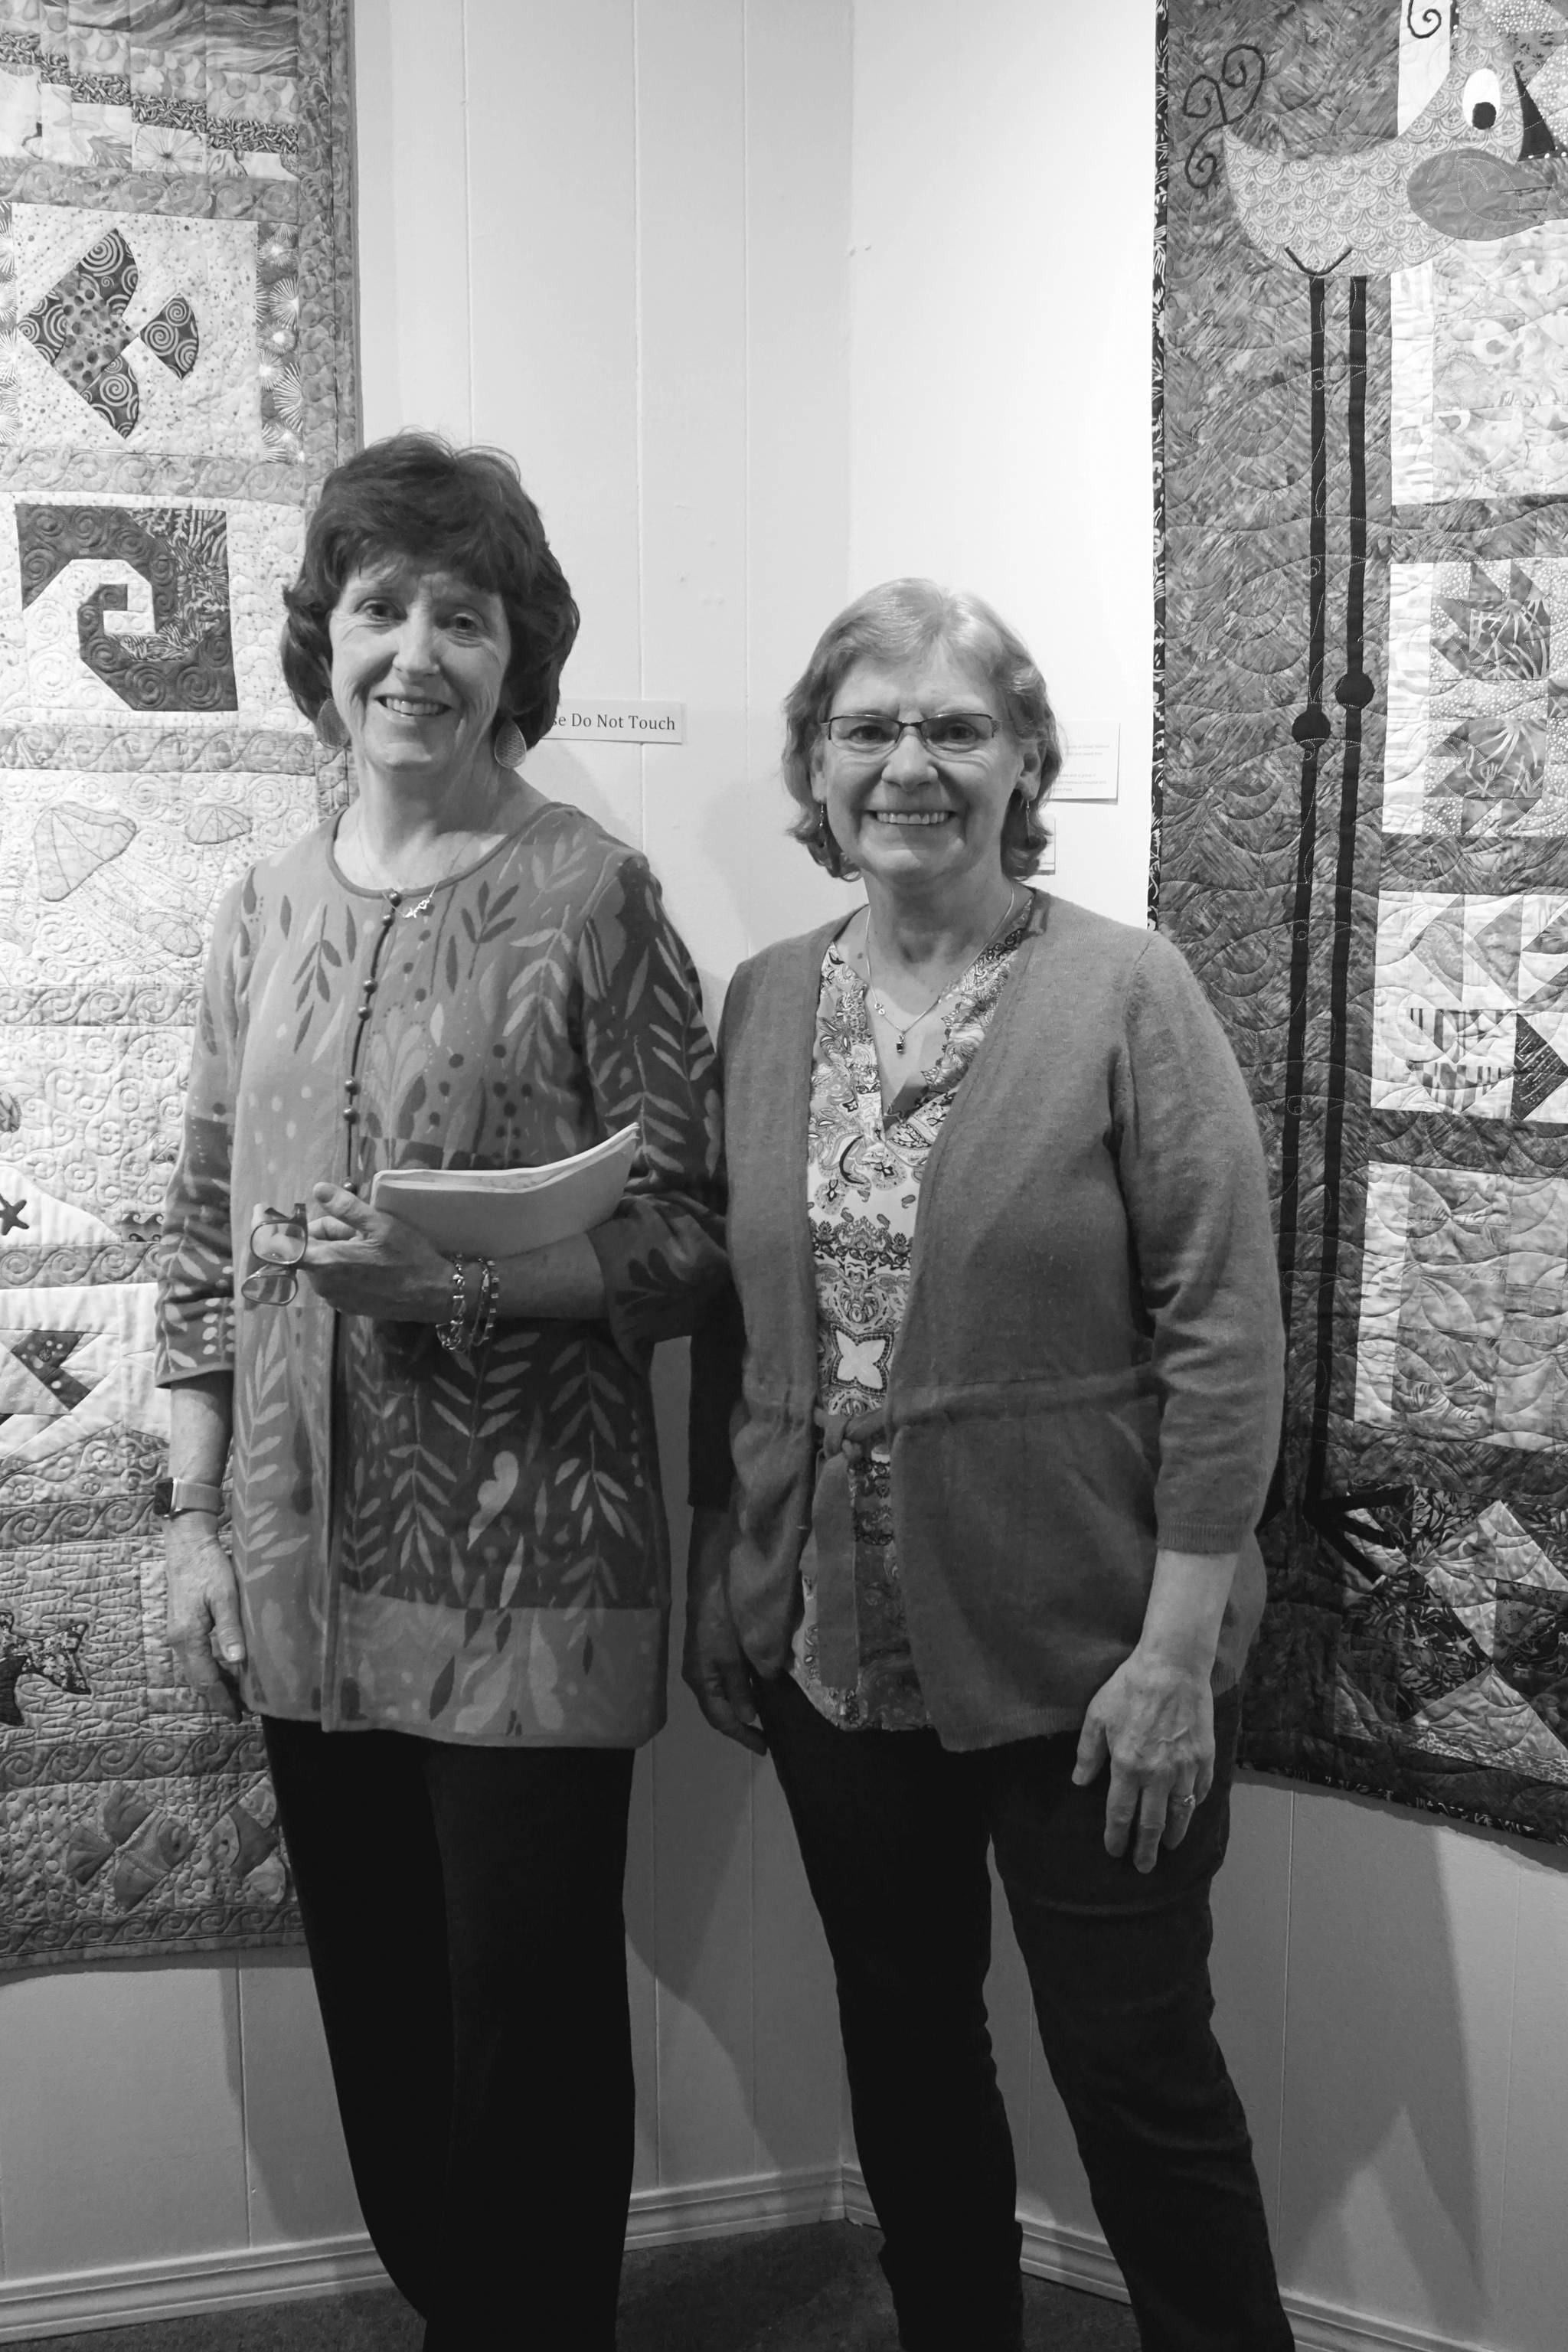 Patrice Krant, left, and Janet Bacher, right, stand by their quilts in the “9 Women / 9 Quilts” show that opened last Friday, Feb. 1, 2019, at the Homer Council on the Arts, in Homer, Alaska. (Photo by Michael Armstrong/Homer News)